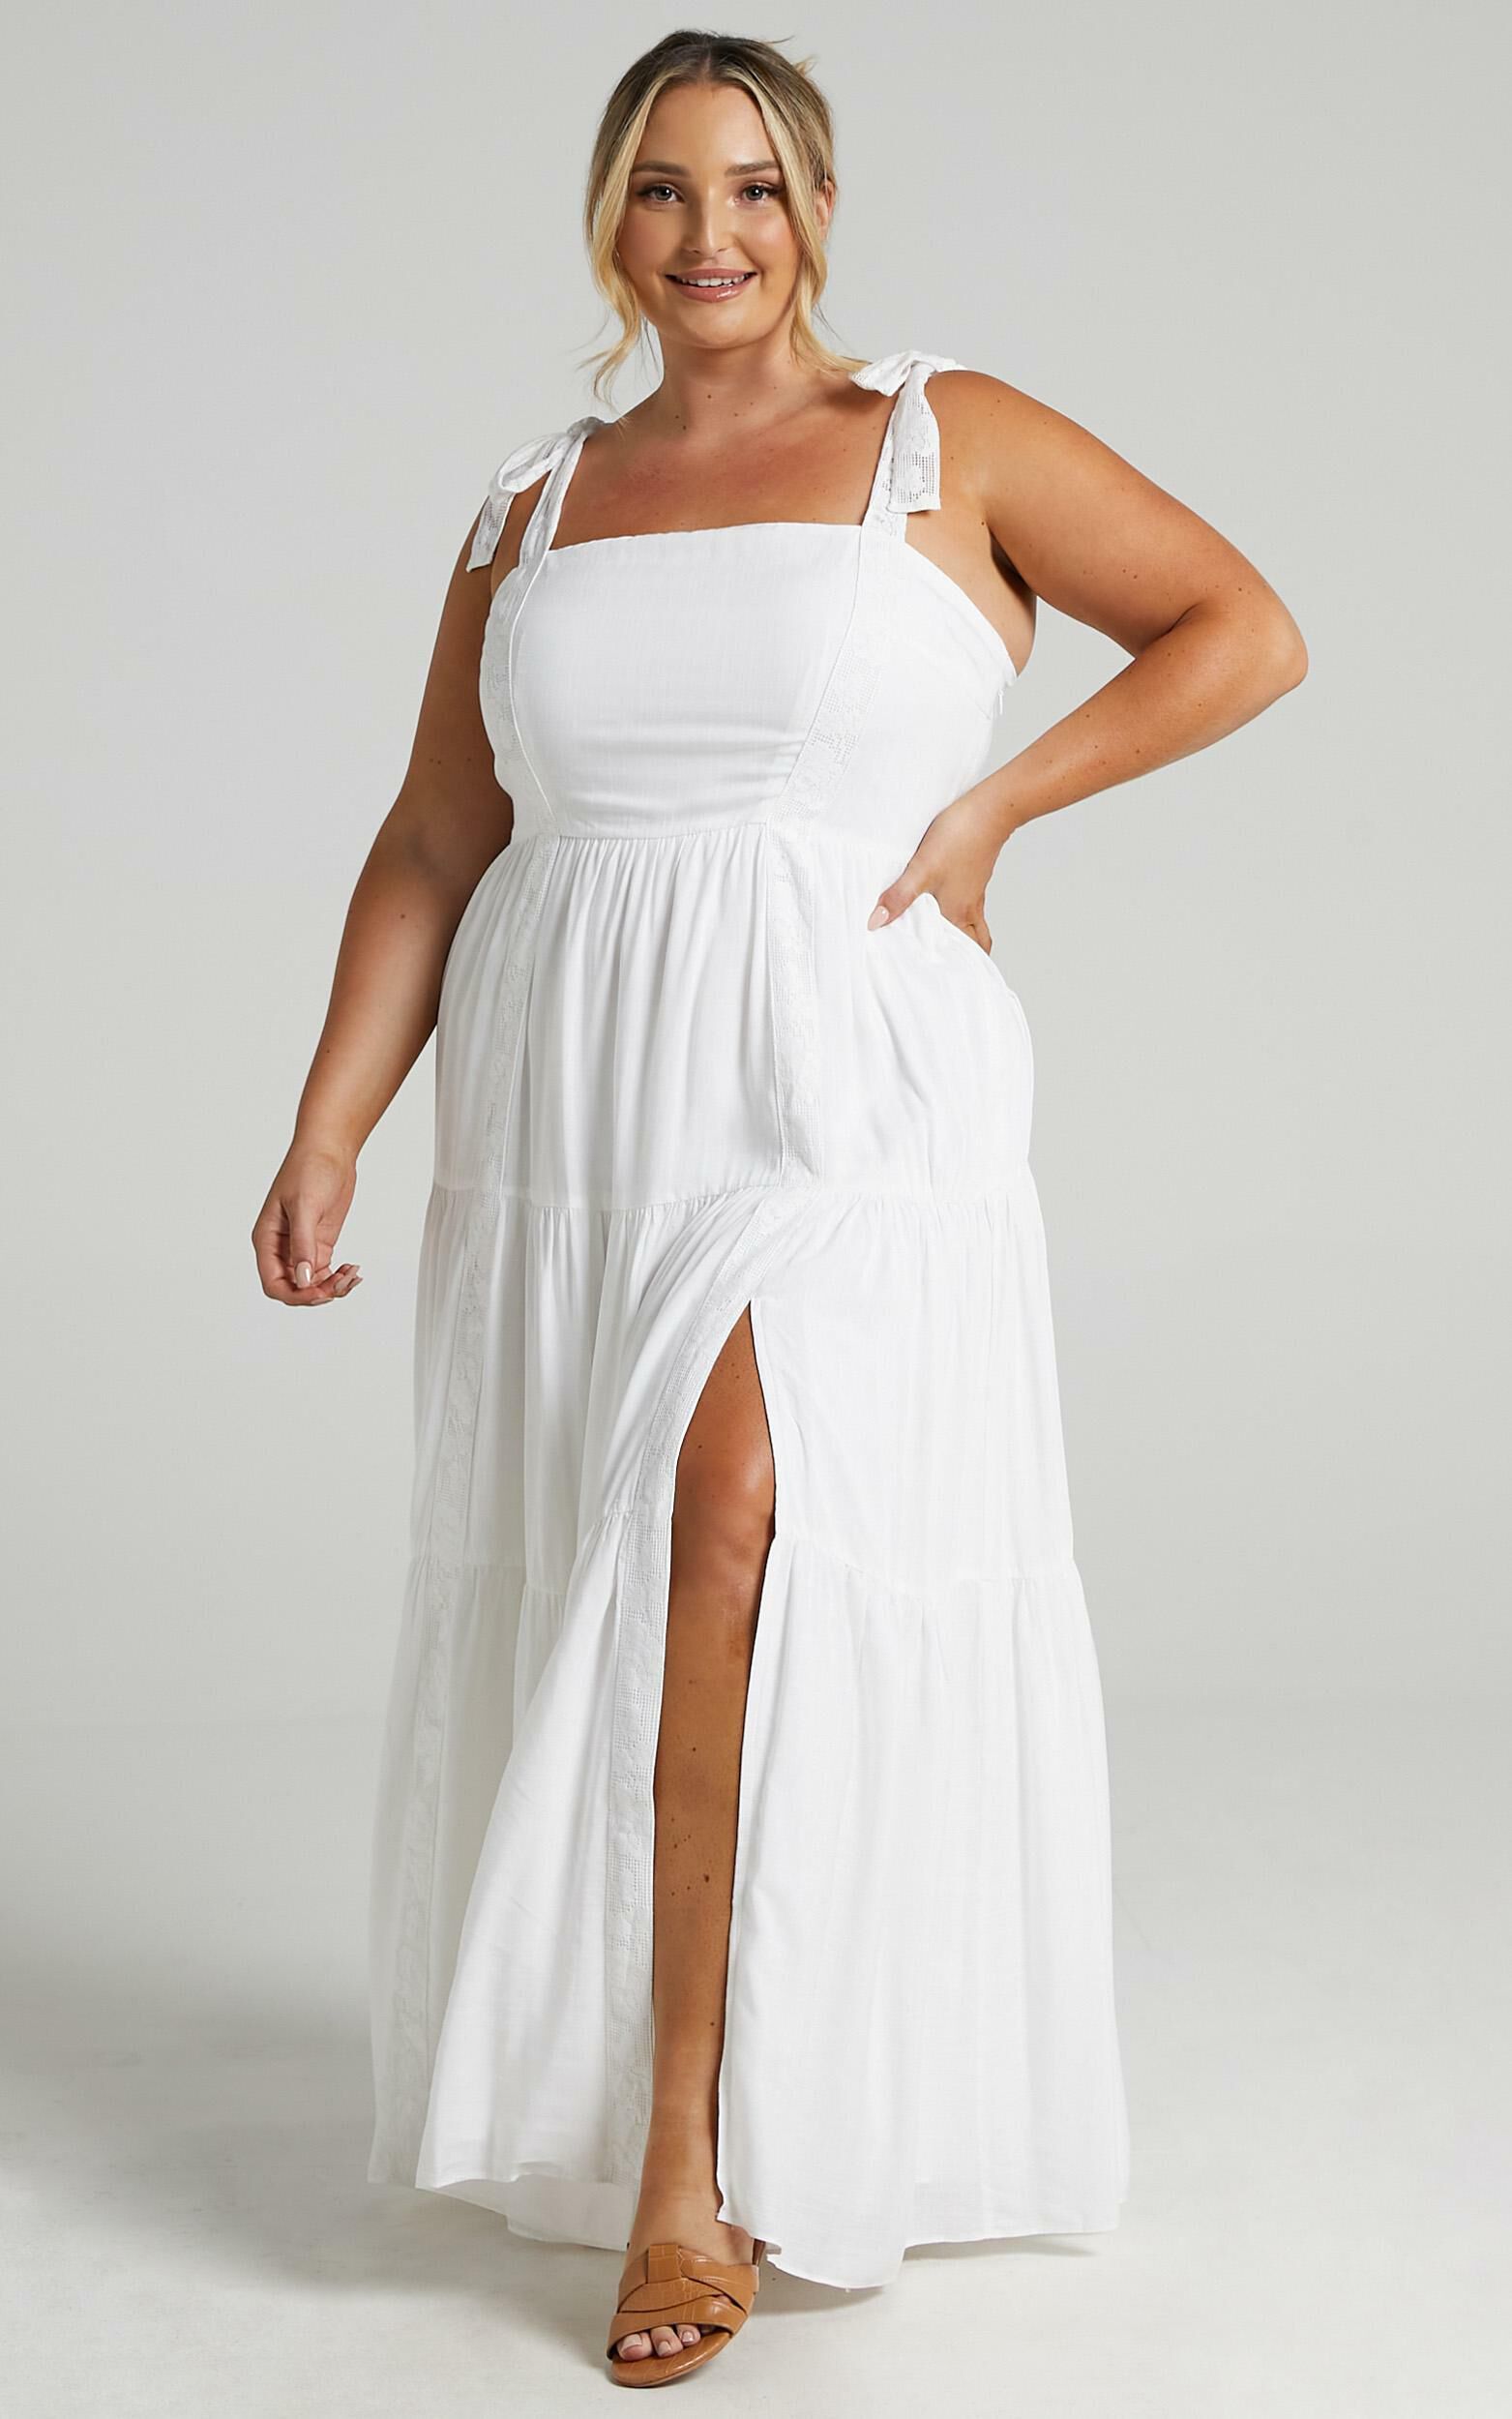 Afternoon Stroll Split Maxi Dress in White - 04, WHT2